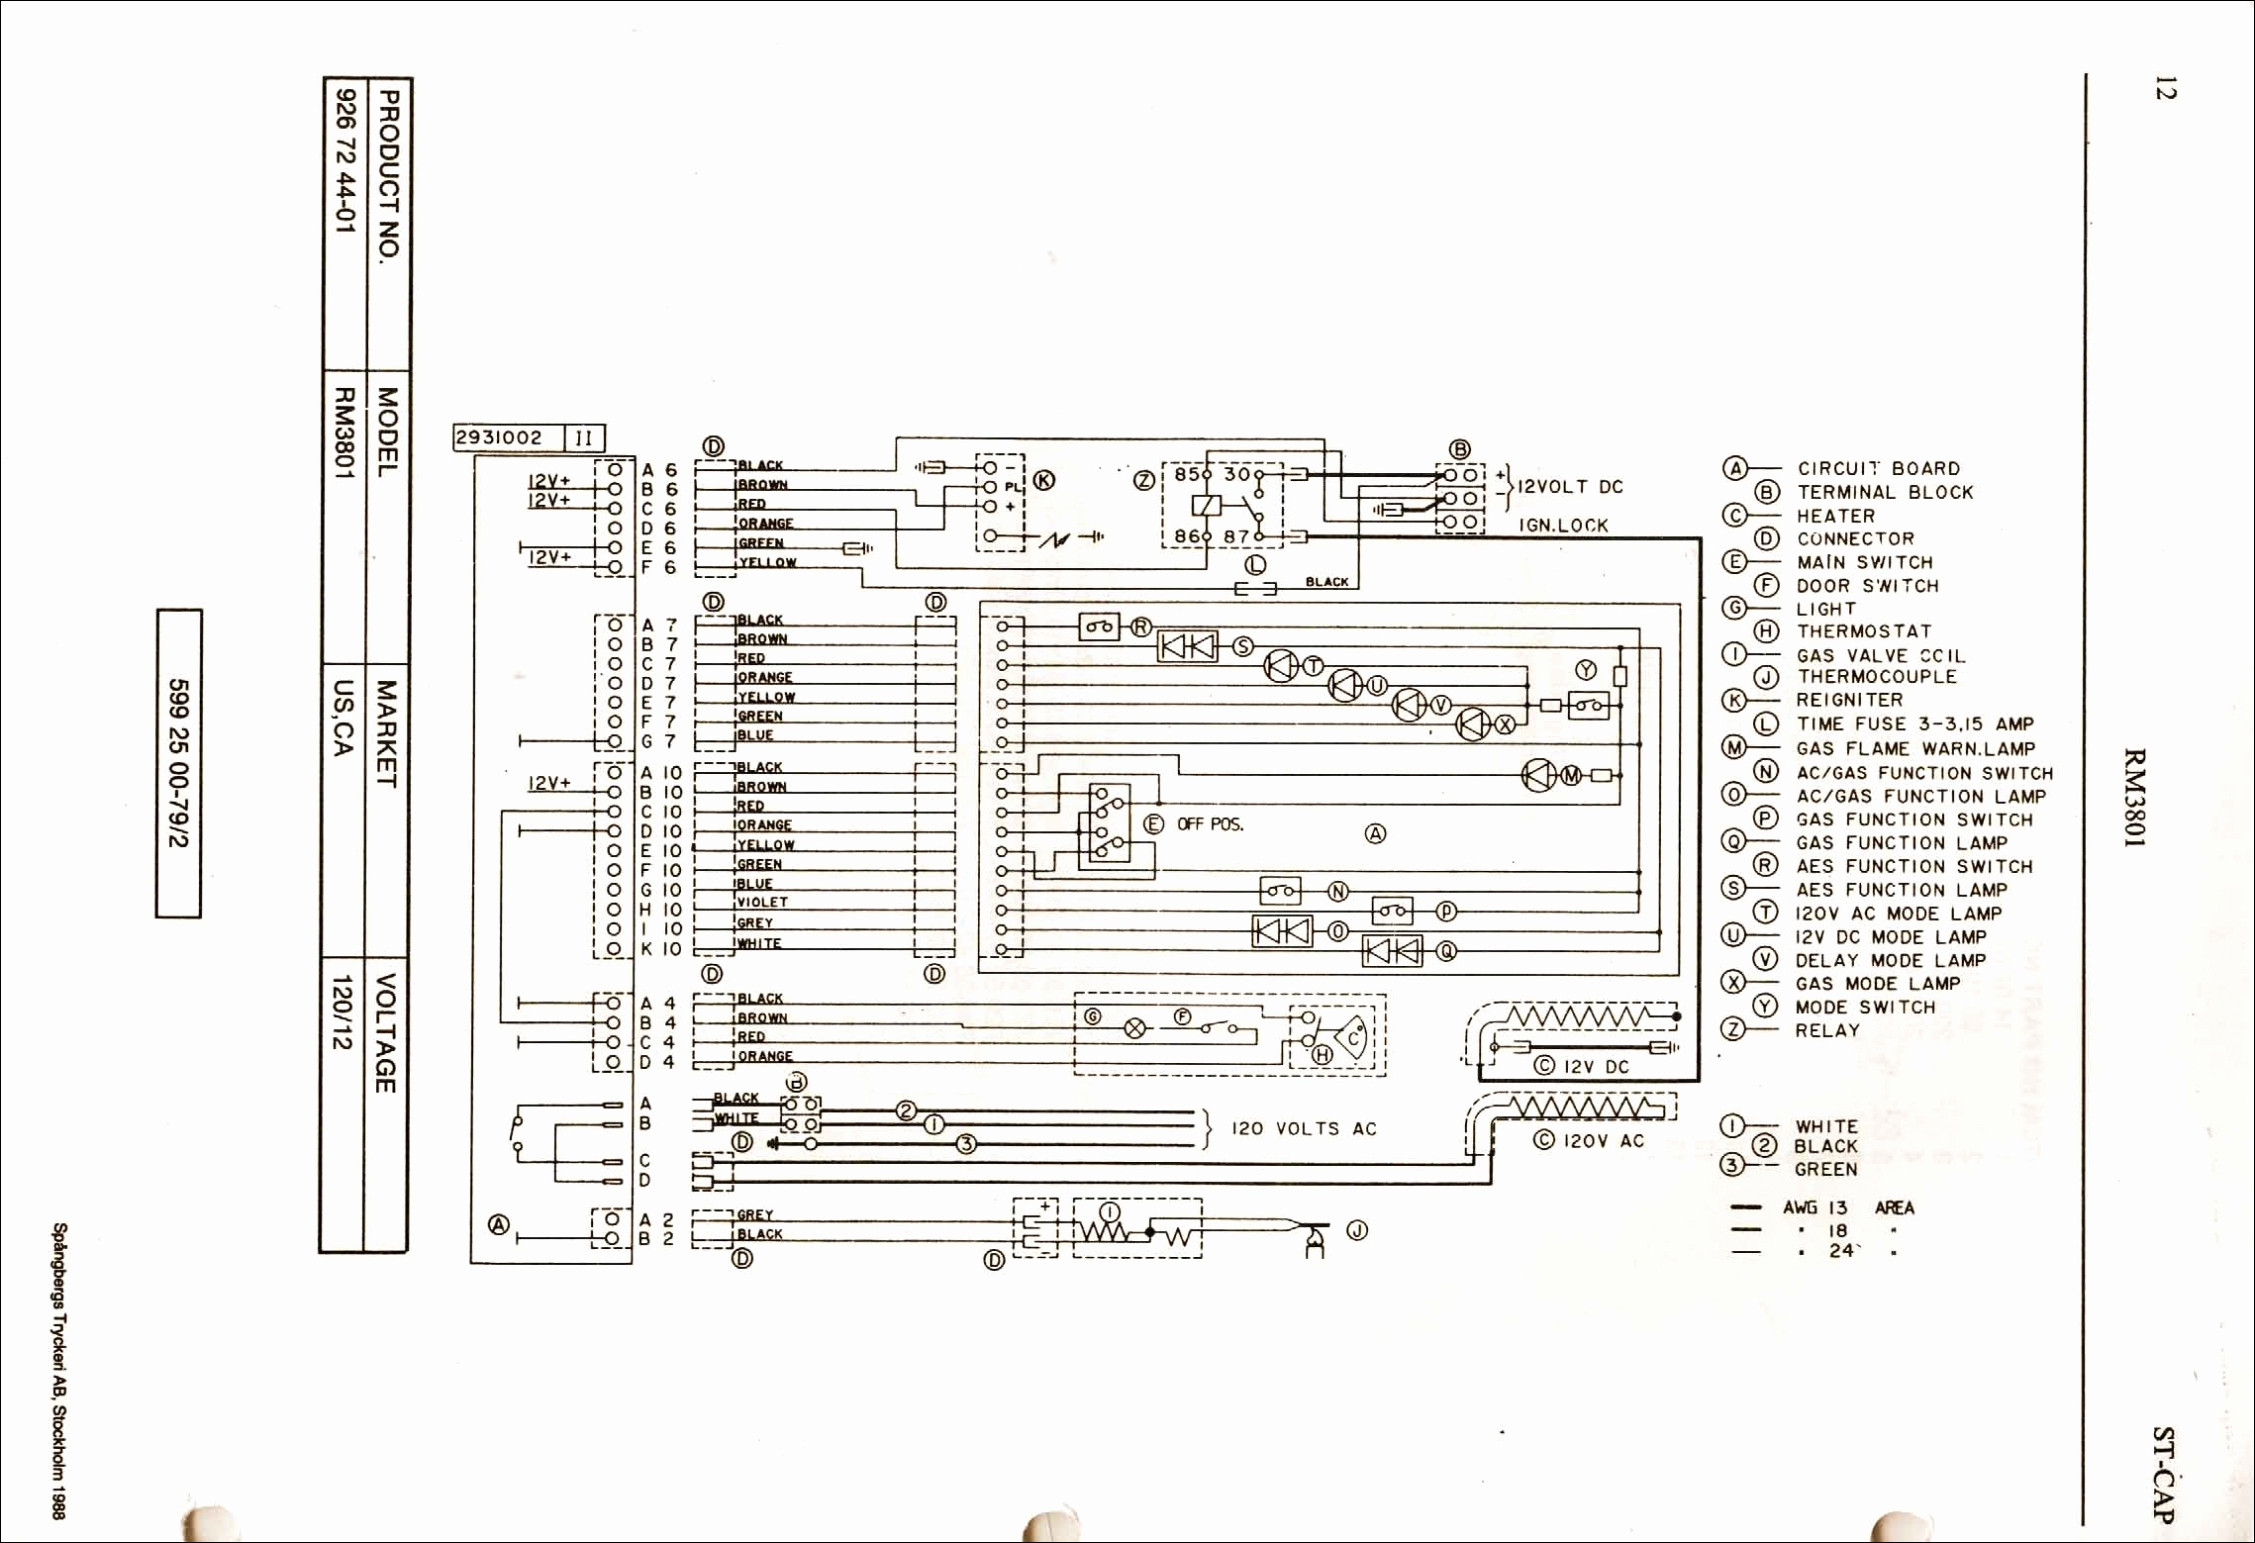 Heat Pump Thermostat Wiring Diagram Dometic Thermostat Wiring Diagram Awesome Heat Pump Thermostat